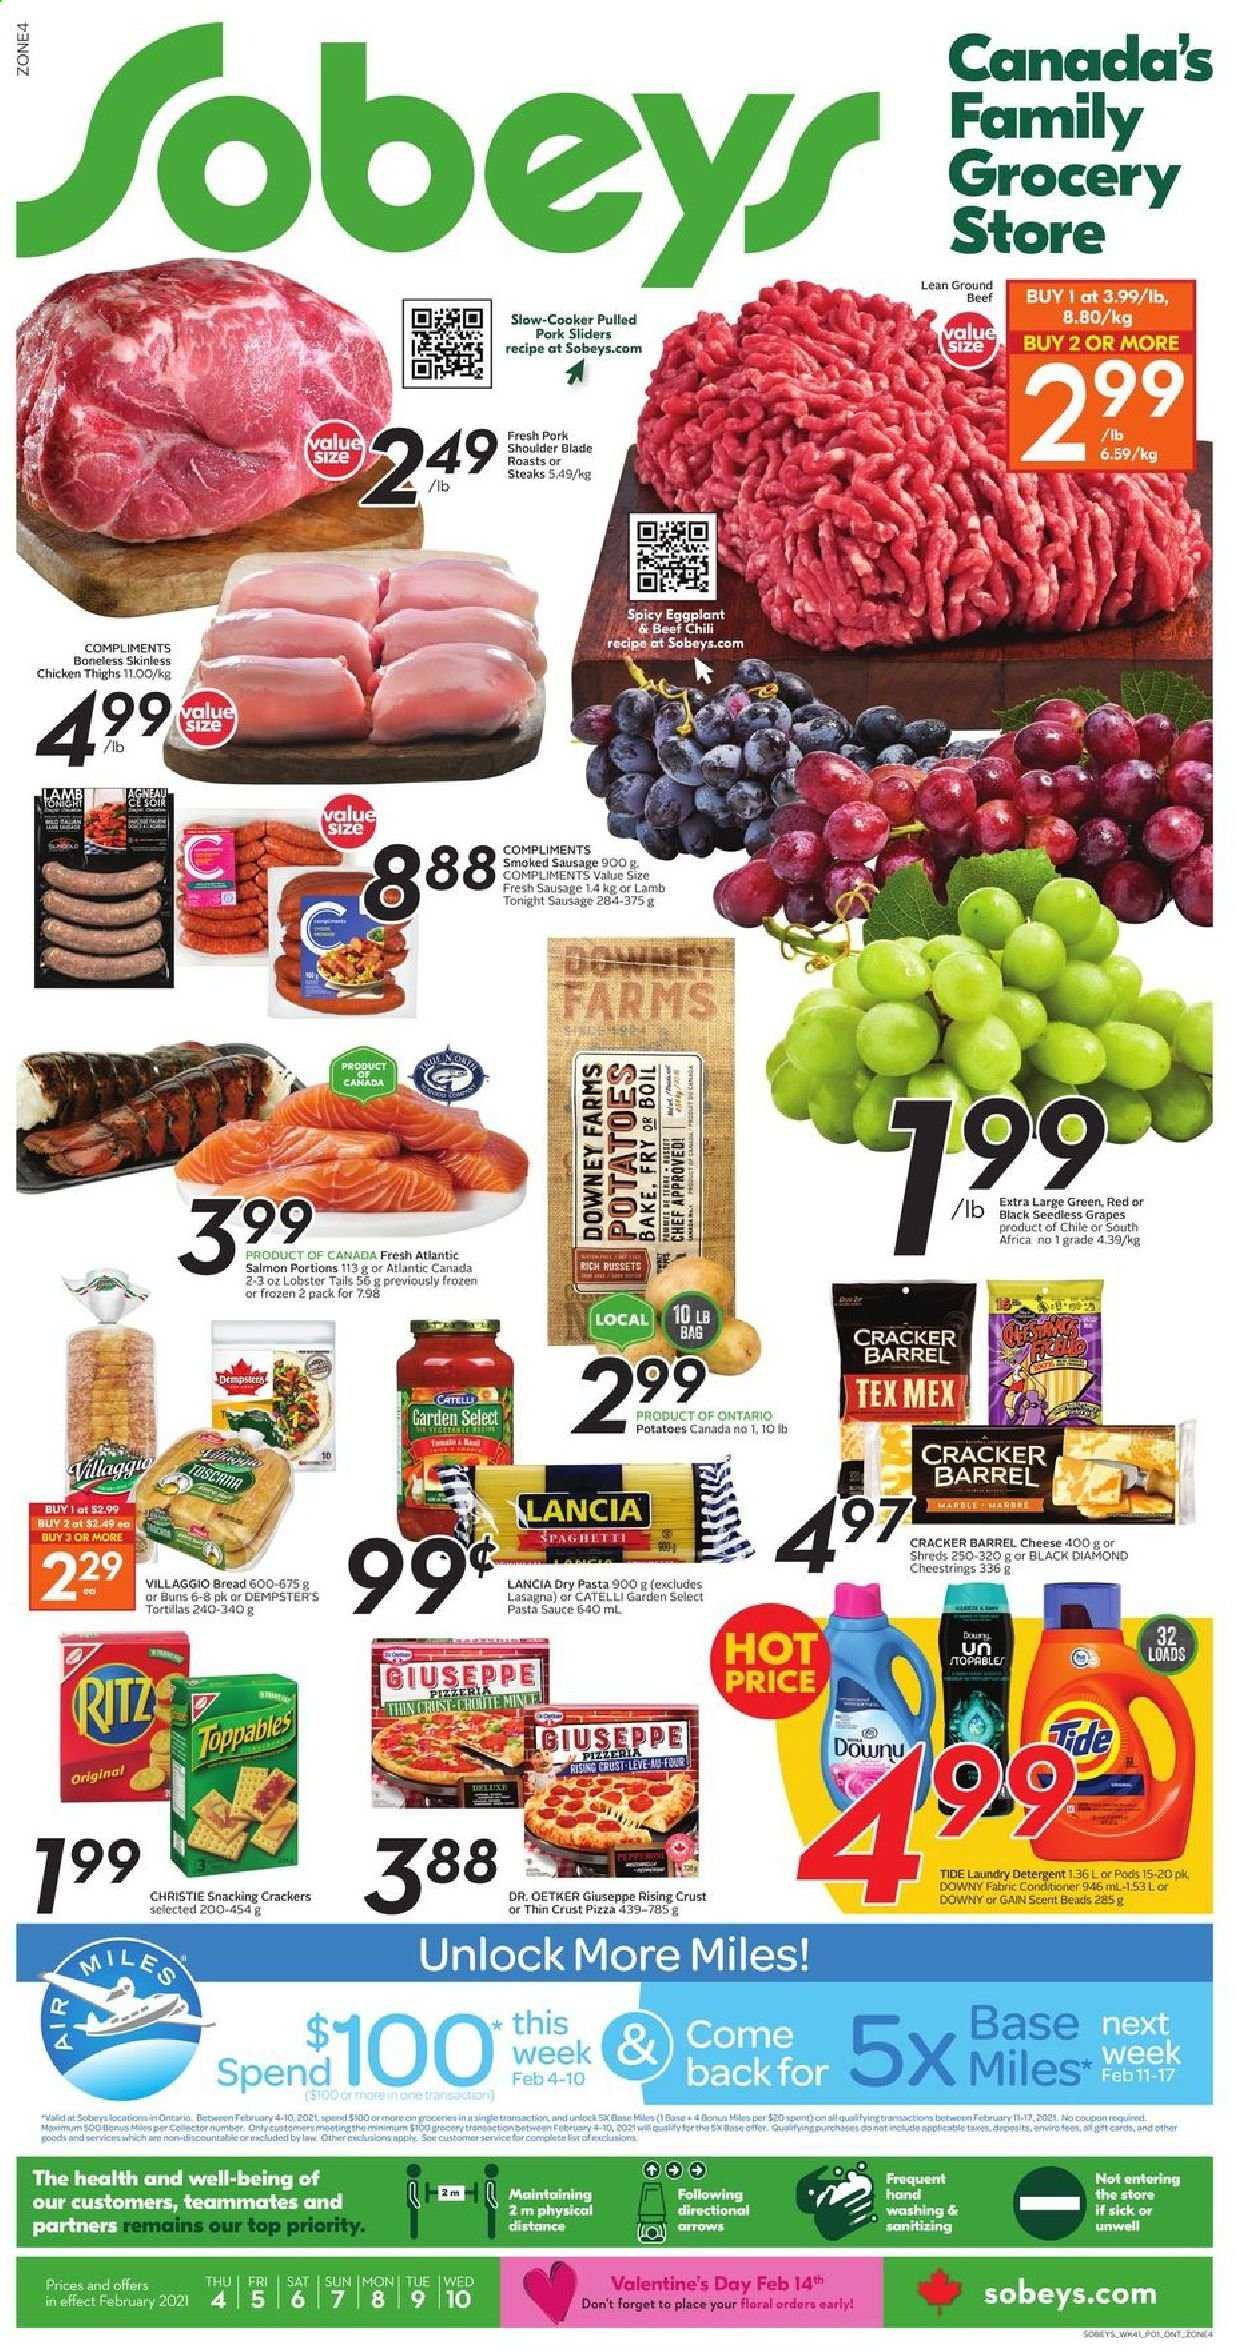 thumbnail - Sobeys Flyer - February 04, 2021 - February 10, 2021 - Sales products - bread, tortillas, buns, potatoes, eggplant, grapes, seedless grapes, spaghetti, pizza, pasta sauce, sauce, pulled pork, sausage, smoked sausage, string cheese, Dr. Oetker, crackers, RITZ, L'Or, chicken thighs, chicken, beef meat, ground beef, pork meat, pork shoulder, Gain, Tide, laundry detergent, Downy Laundry, steak. Page 1.